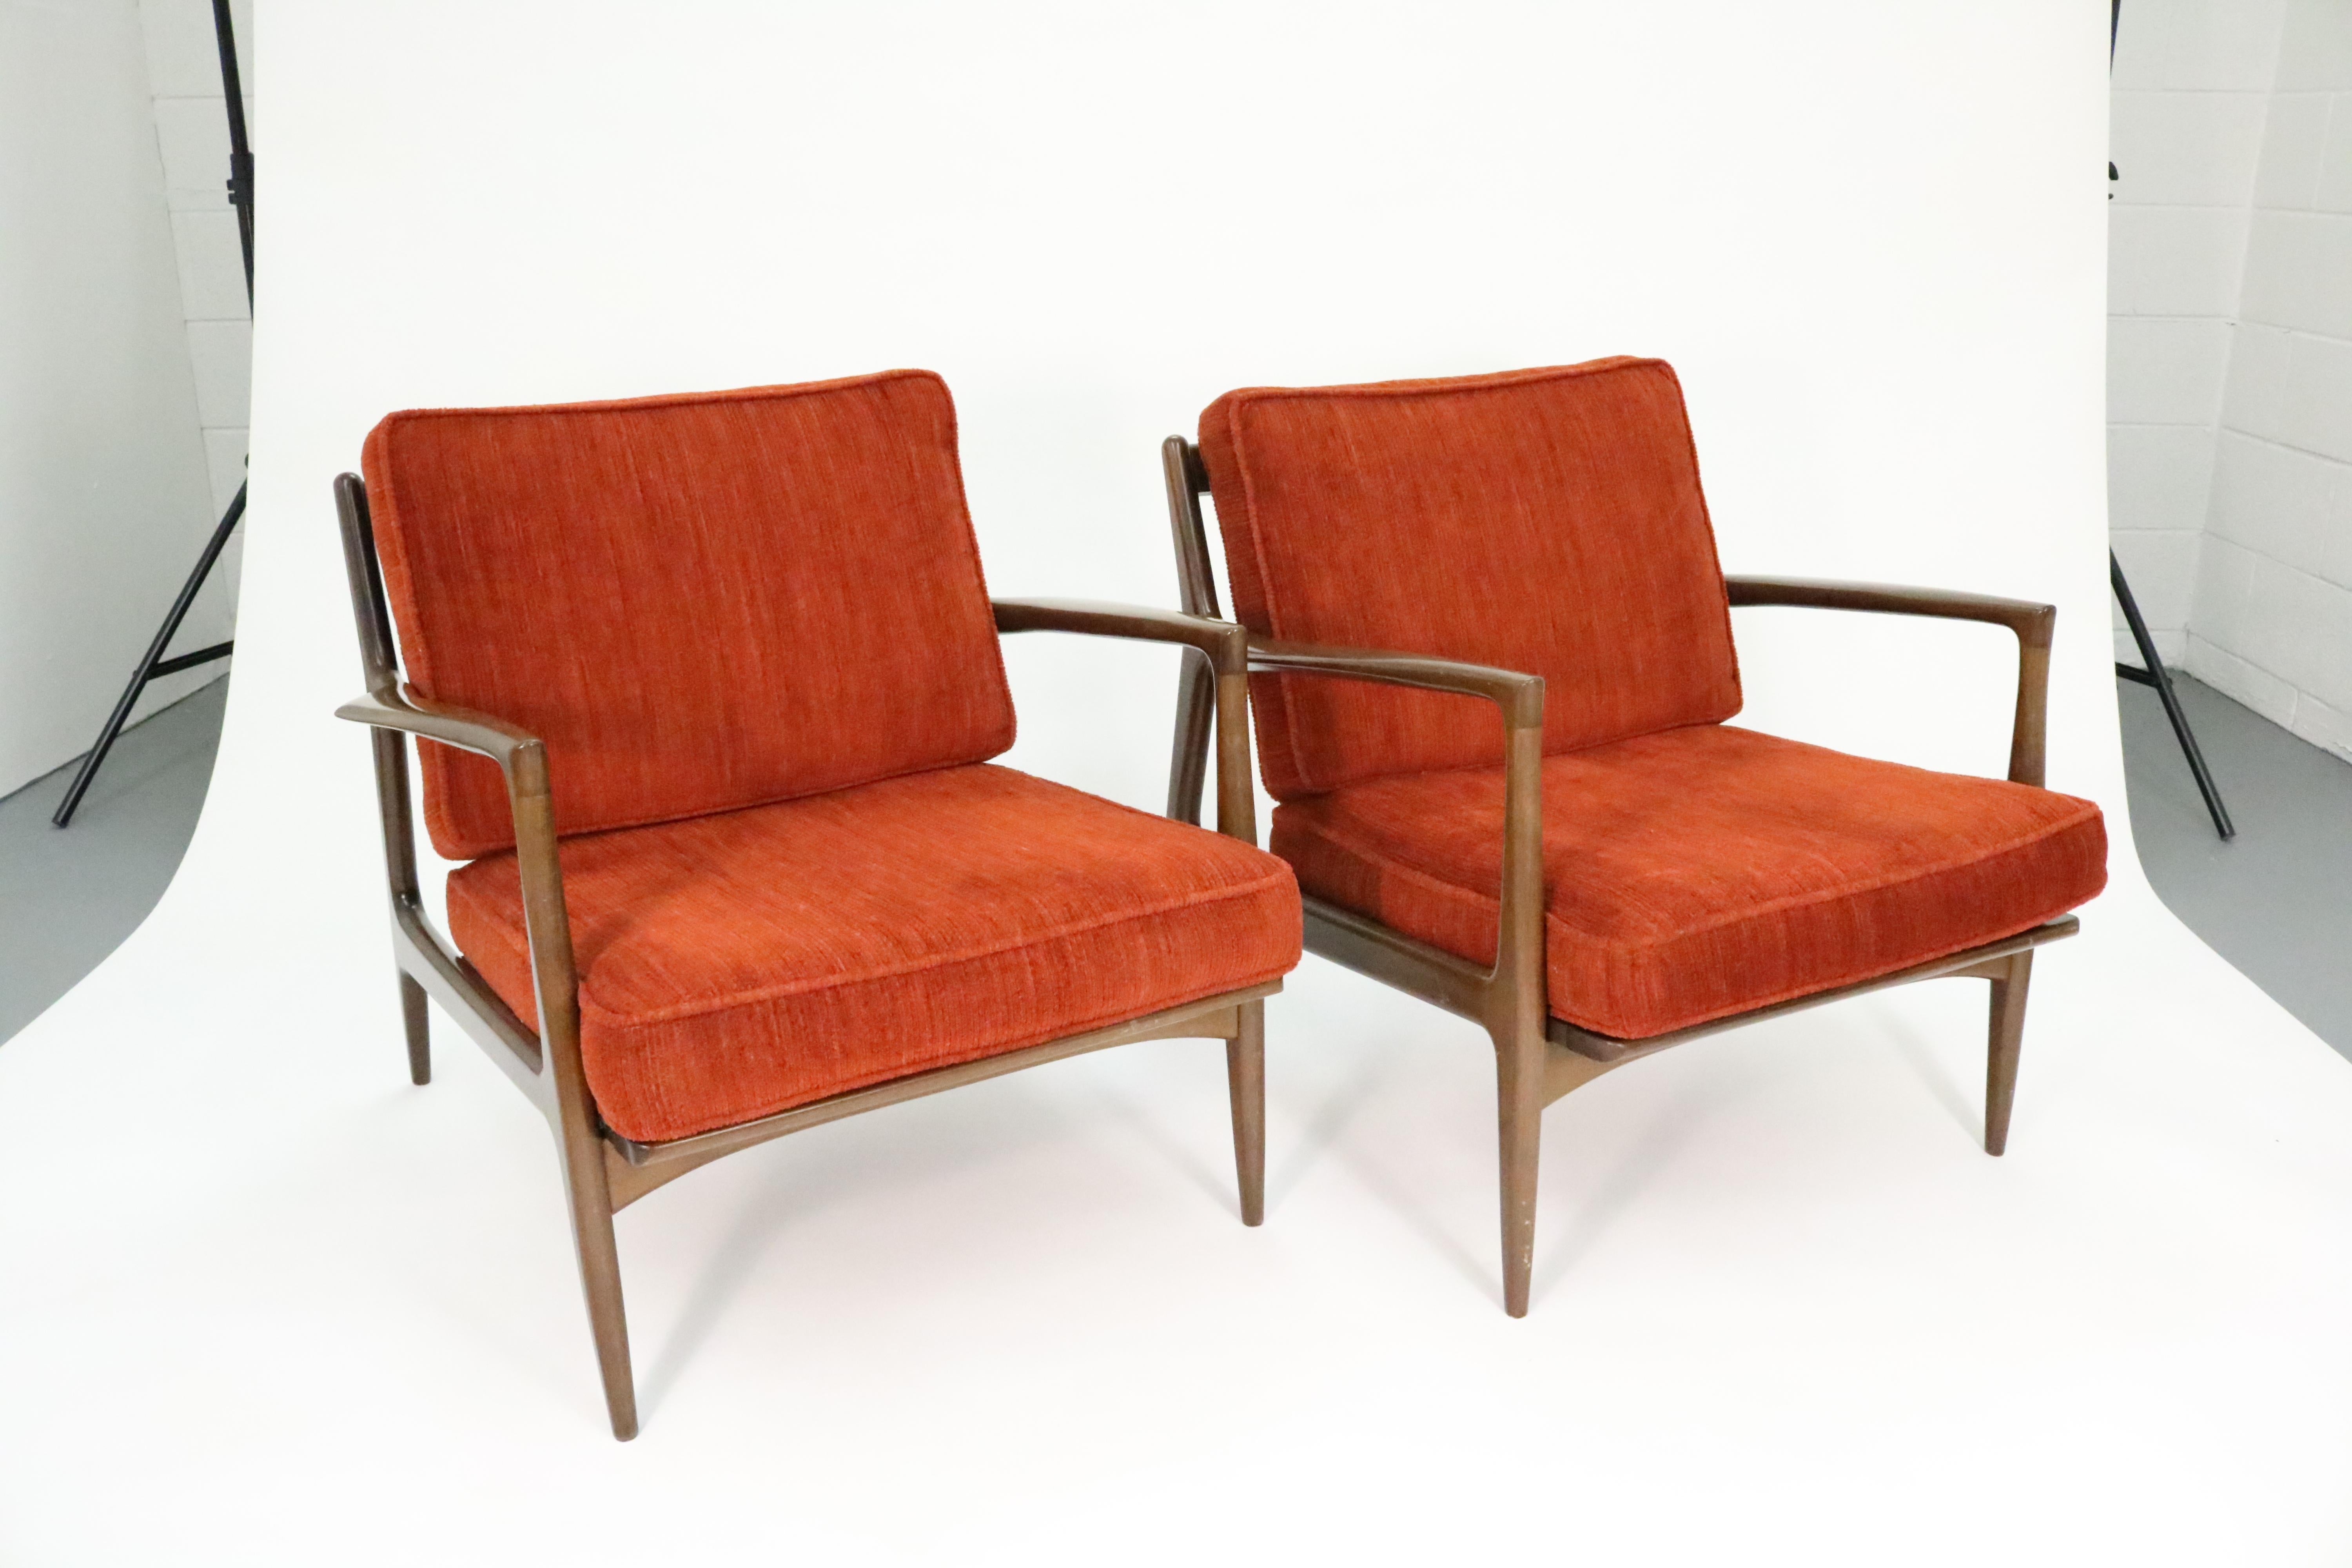 Mid-20th Century Kofod-Larsen Danish Modern Sculpted Lounge Chairs for Selig